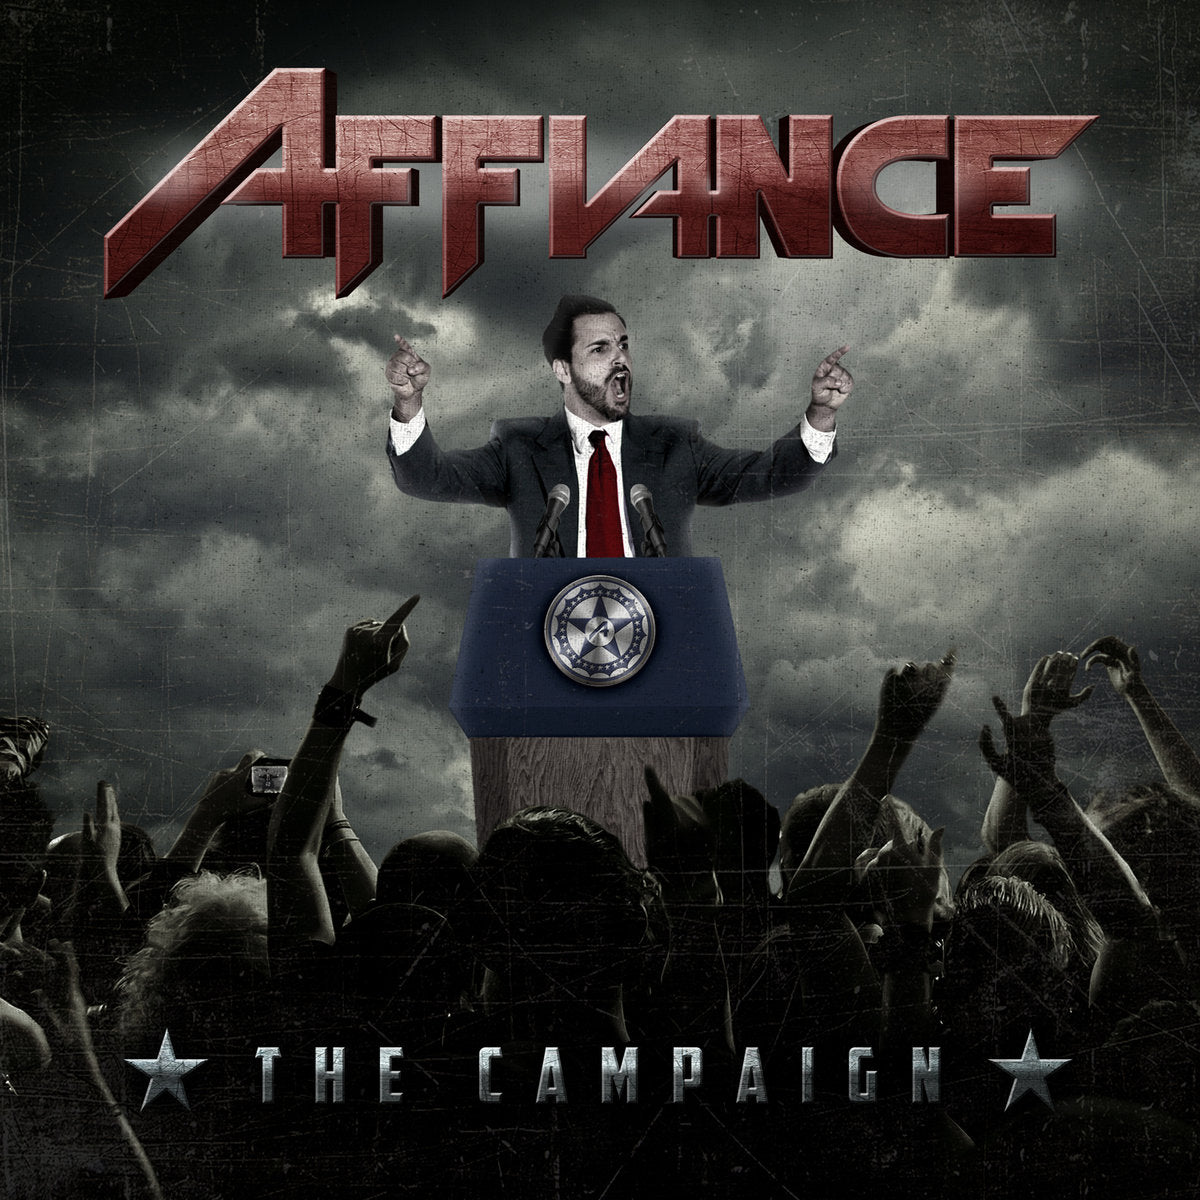 Affiance "The Campaign" CD